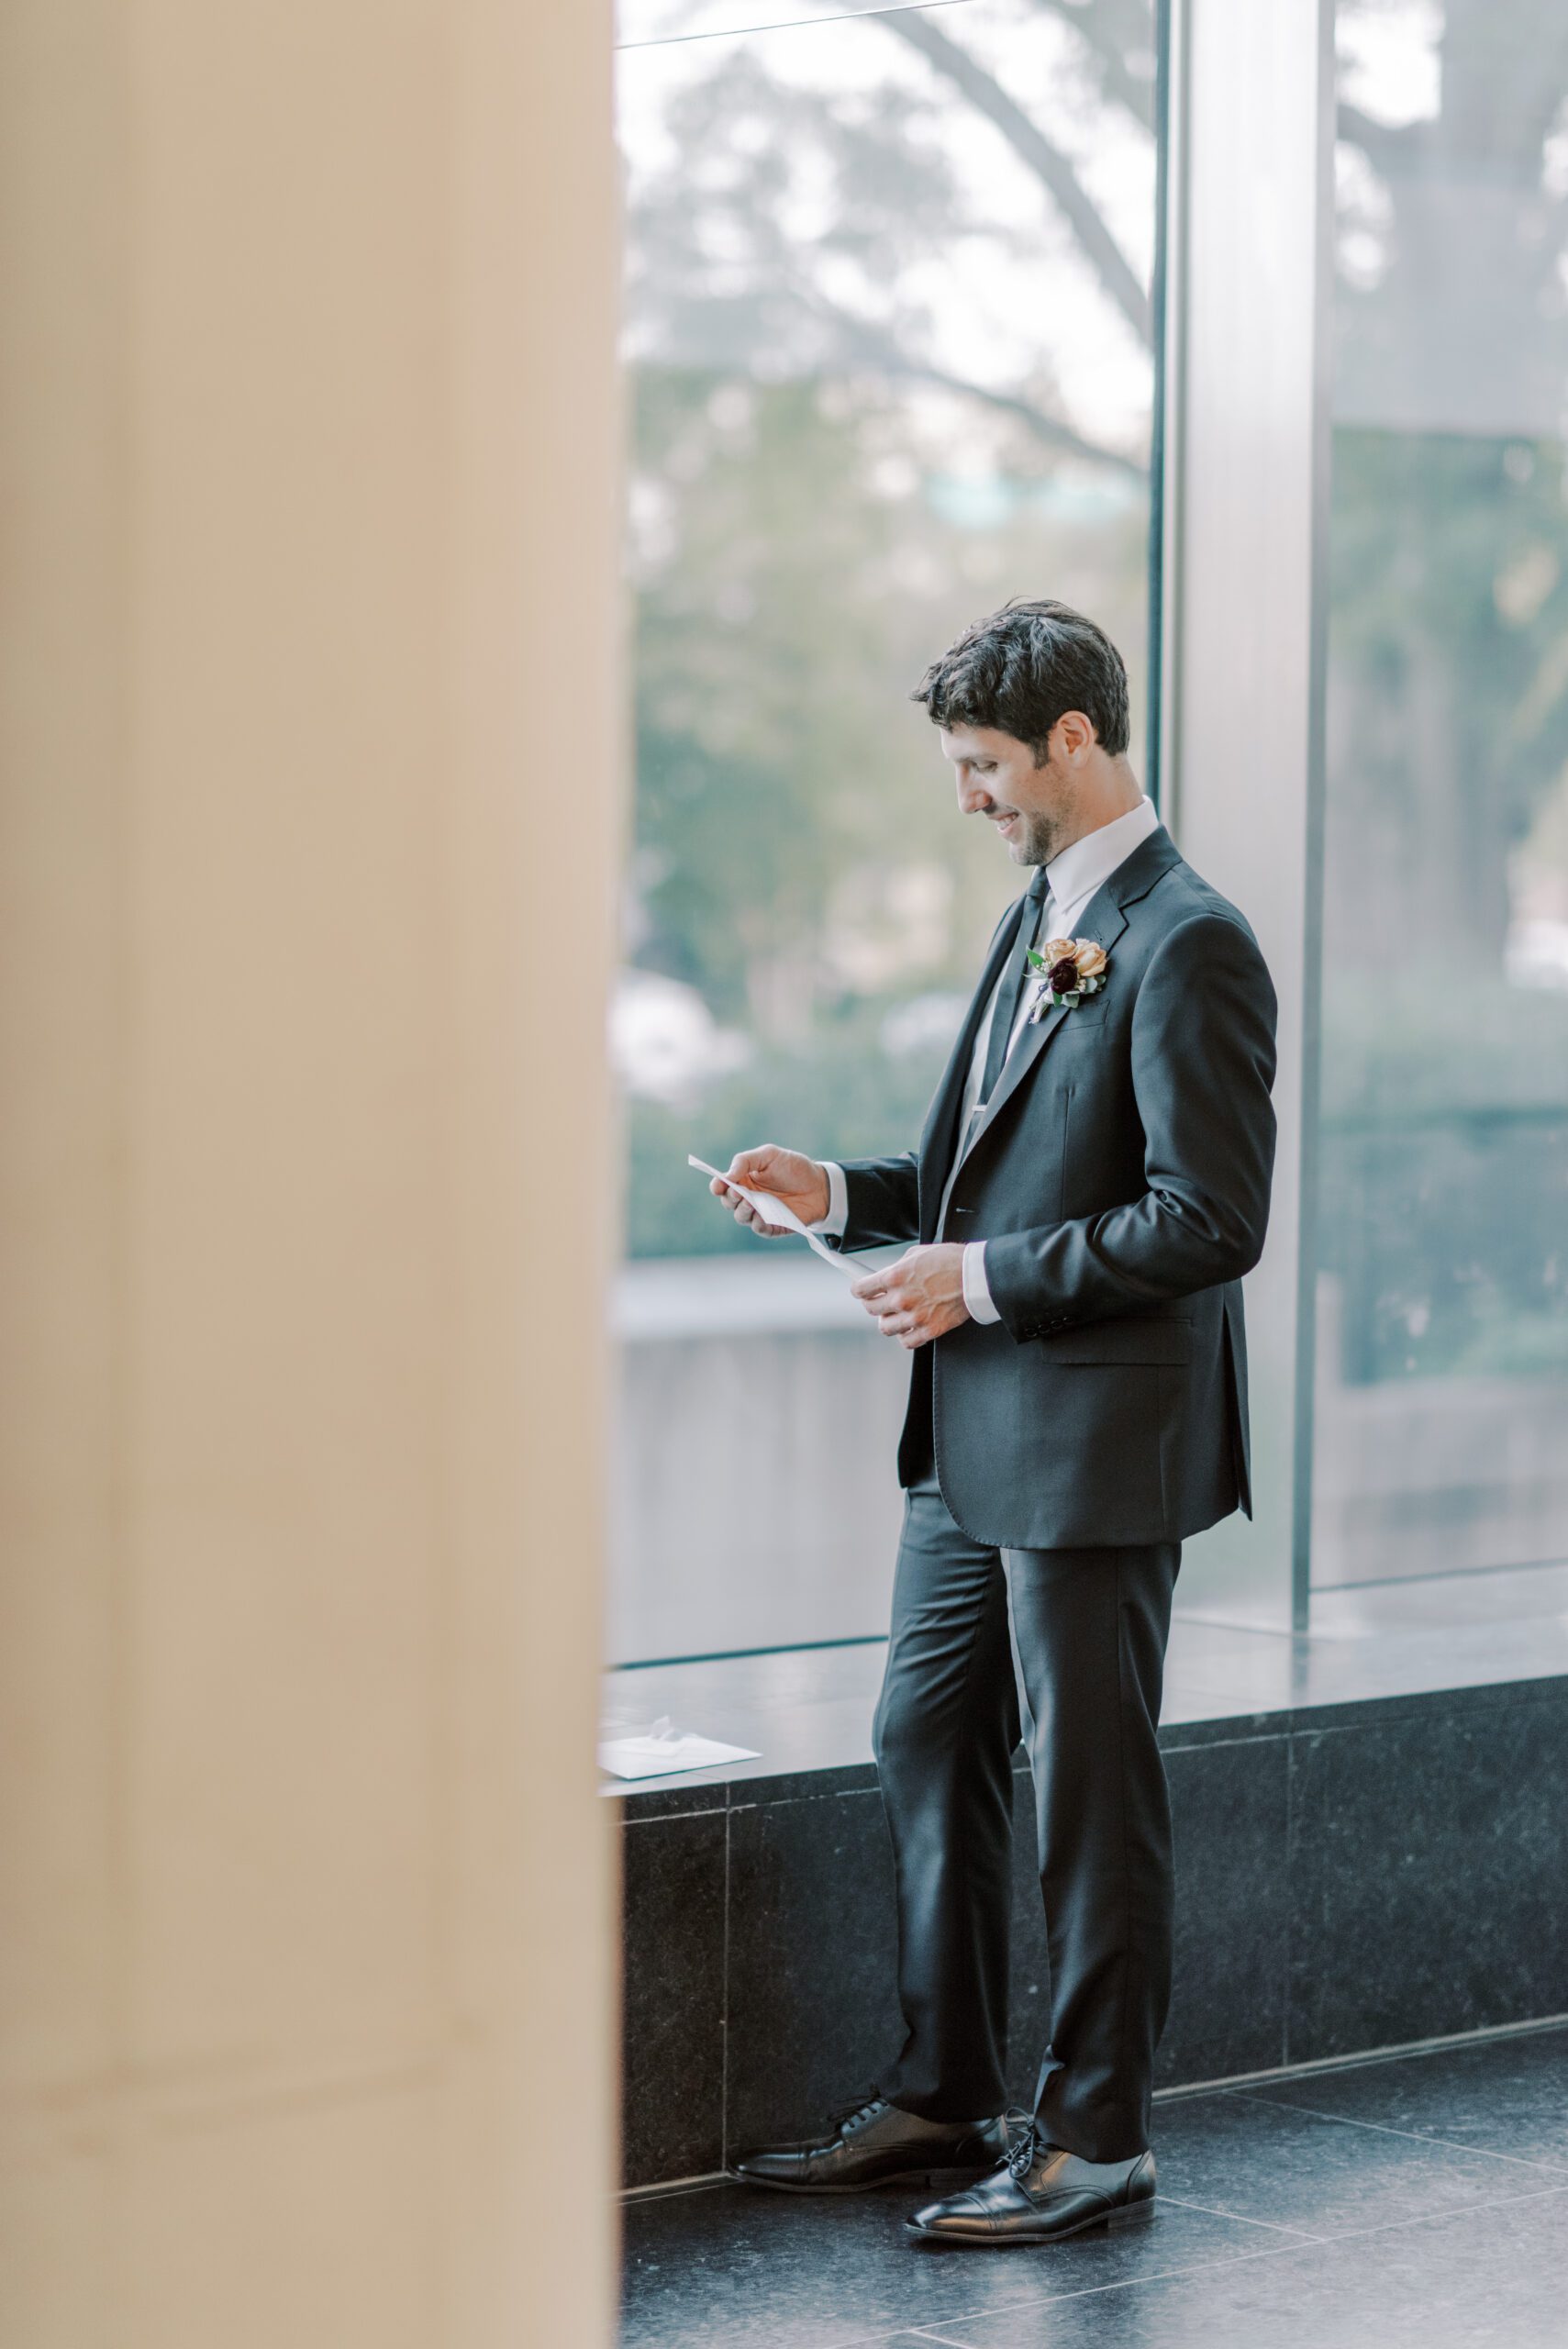 Photo of groom standing, taken from afar as he smiles down at a letter he is reading